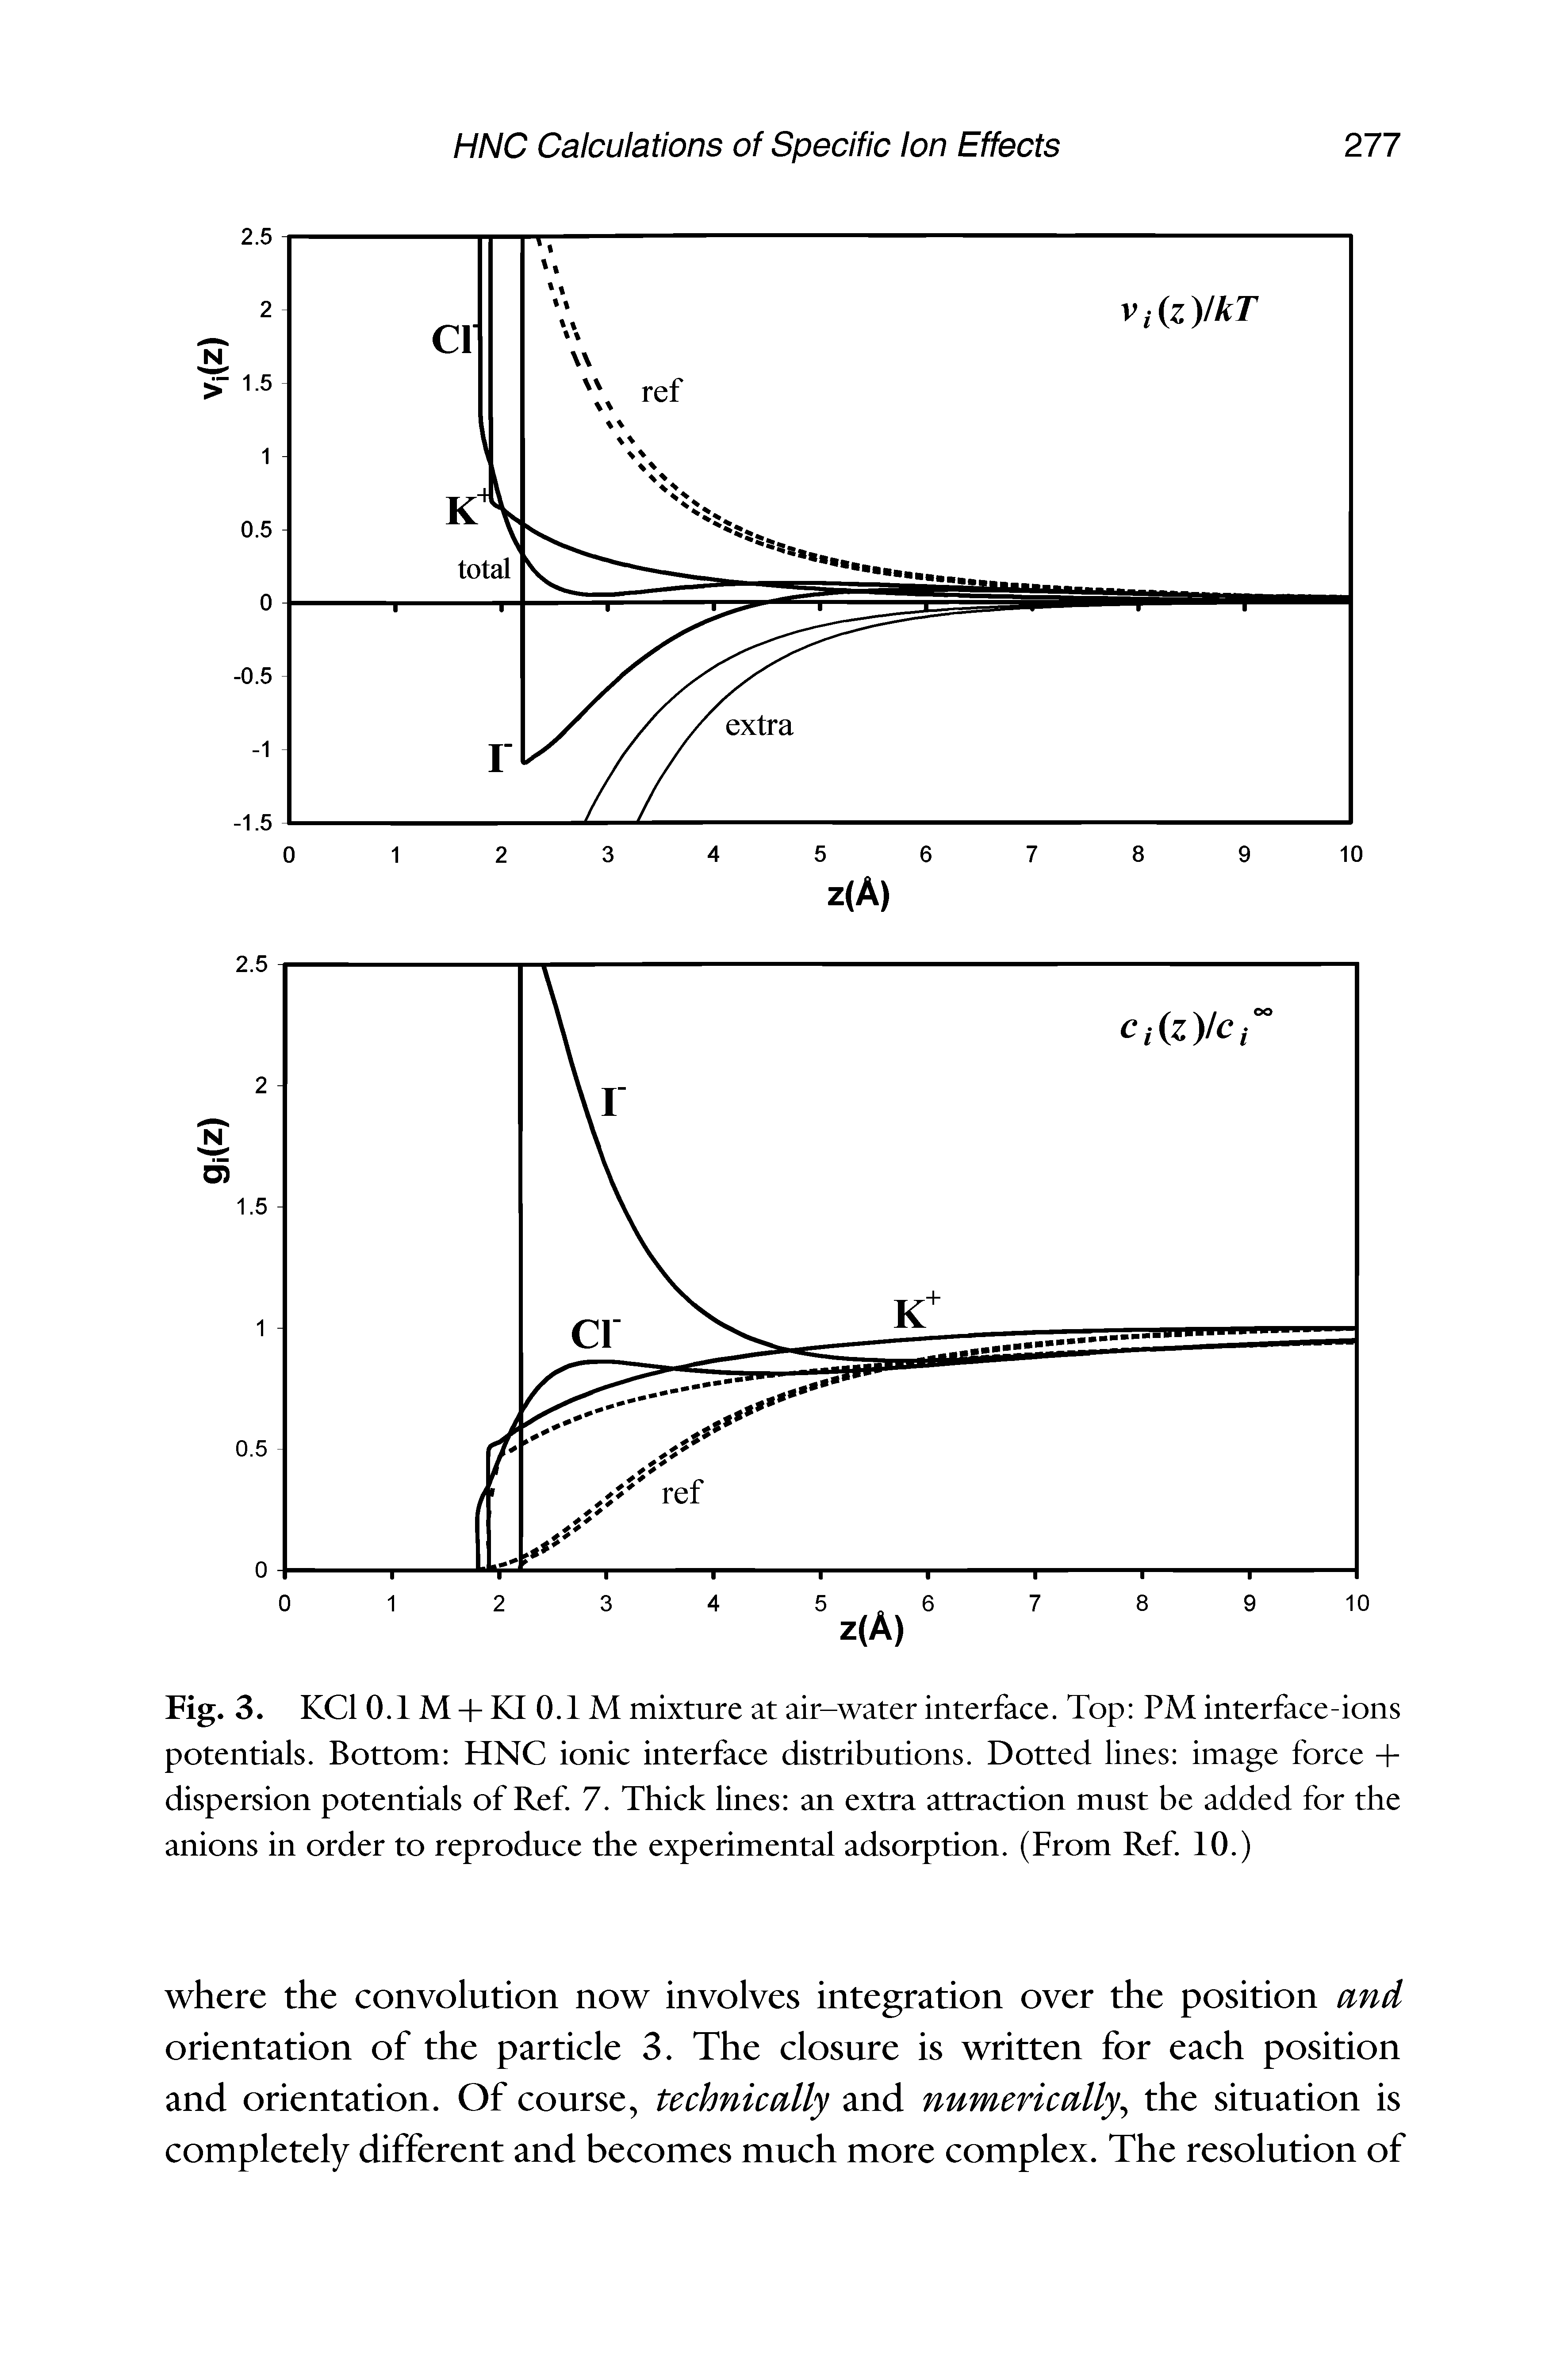 Fig. 3. KCl 0.1 M + KI 0.1 M mixture at air-water interface. Top PM interface-ions potentials. Bottom HNC ionic interface distributions. Dotted lines image force + dispersion potentials of Ref 7. Thick lines an extra attraction must be added for the anions in order to reproduce the experimental adsorption. (From Ref. 10.)...